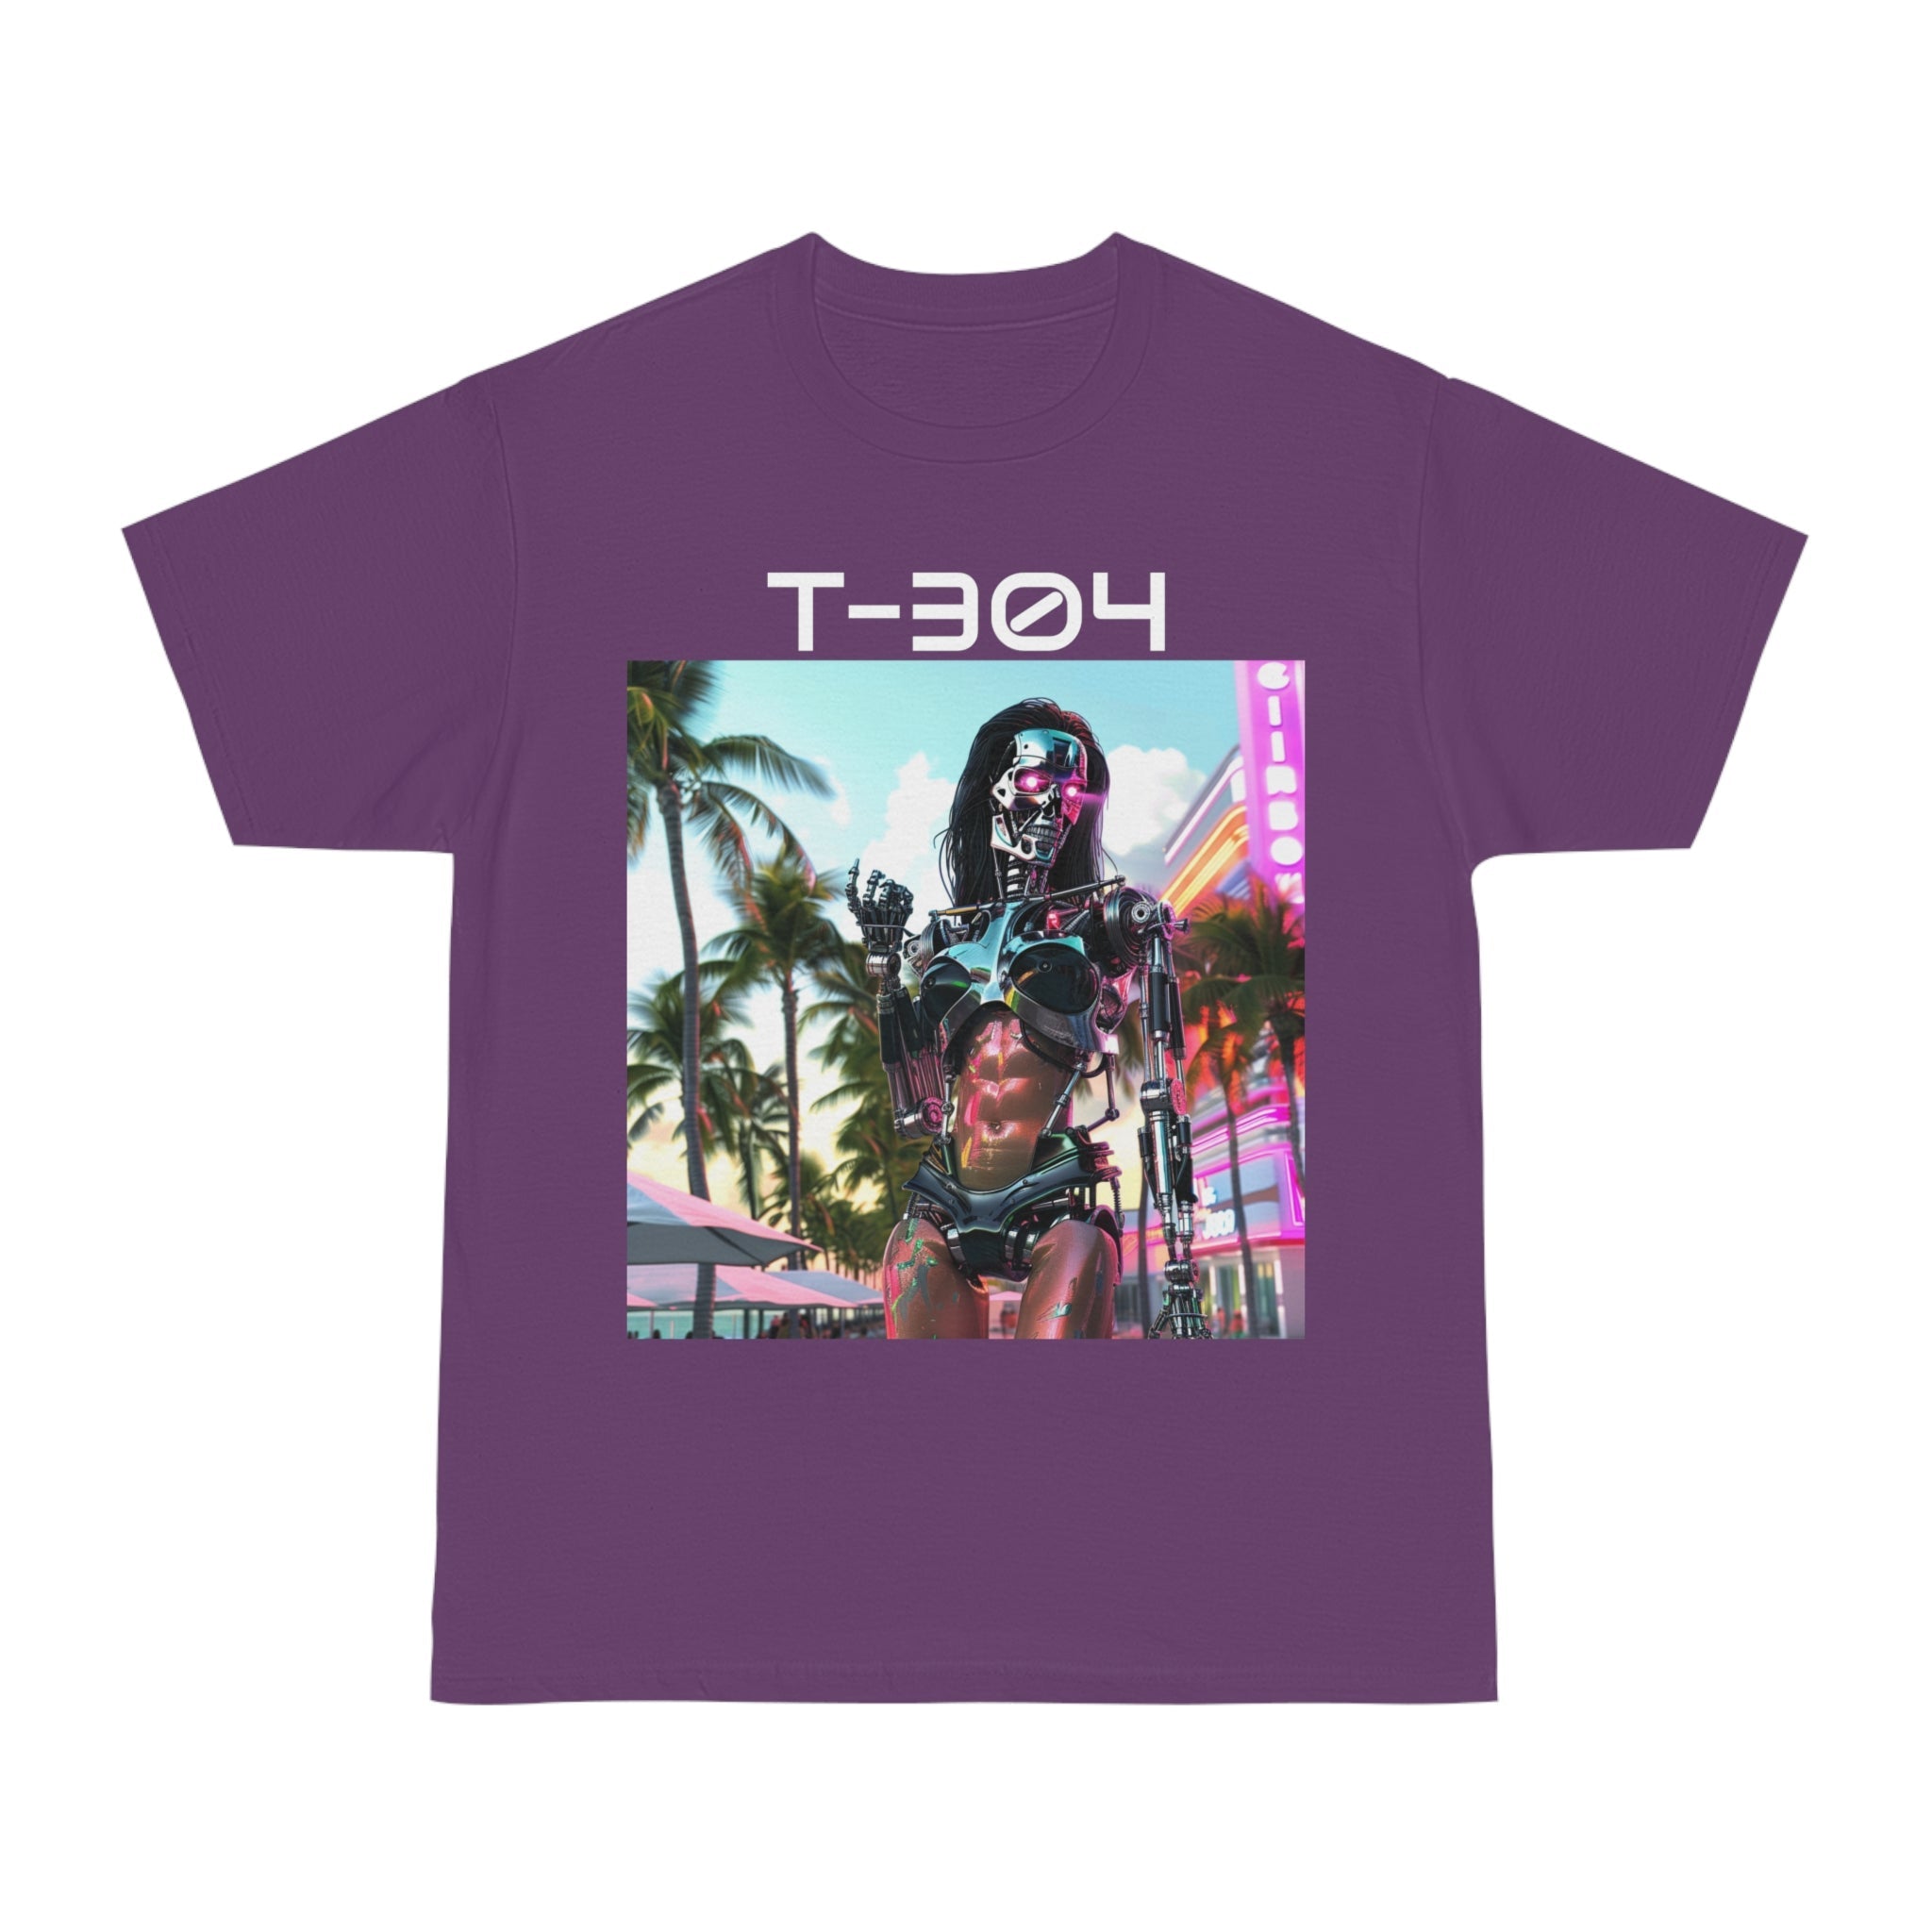 Future Chic: Retro Sci-Fi T-304 'On-Fleek Assassin Glam Gal Unisex Hammer™ T-Shirt - The Ultimate Fusion of Fashion and Fantasy